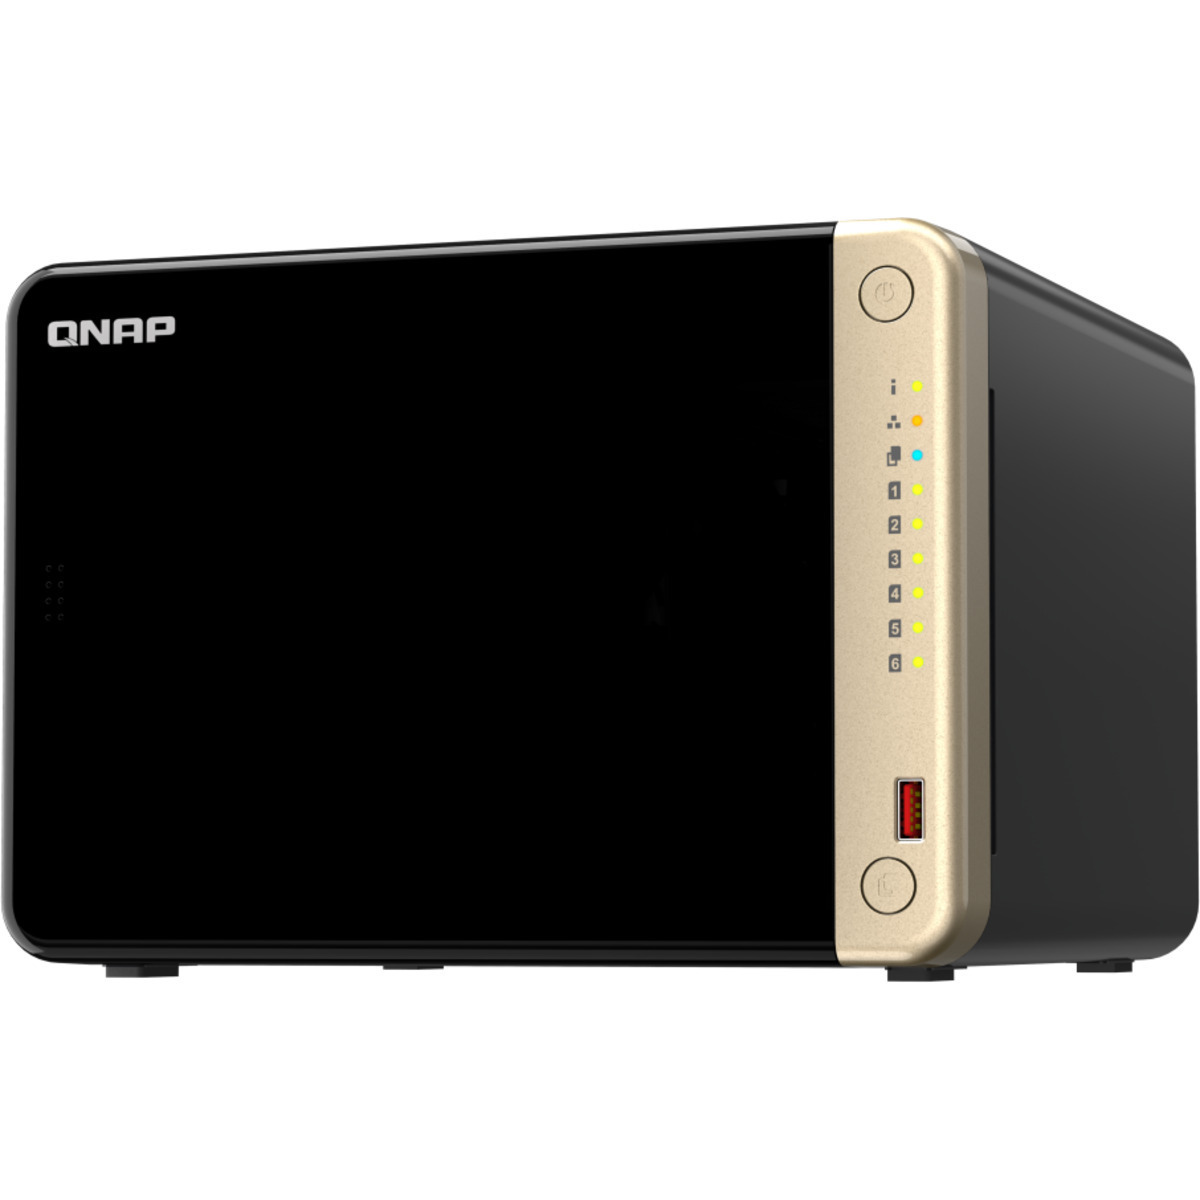 QNAP TS-664 10tb 6-Bay Desktop Multimedia / Power User / Business NAS - Network Attached Storage Device 5x2tb Samsung 870 QVO MZ-77Q2T0 2.5 560/530MB/s SATA 6Gb/s SSD CONSUMER Class Drives Installed - Burn-In Tested TS-664